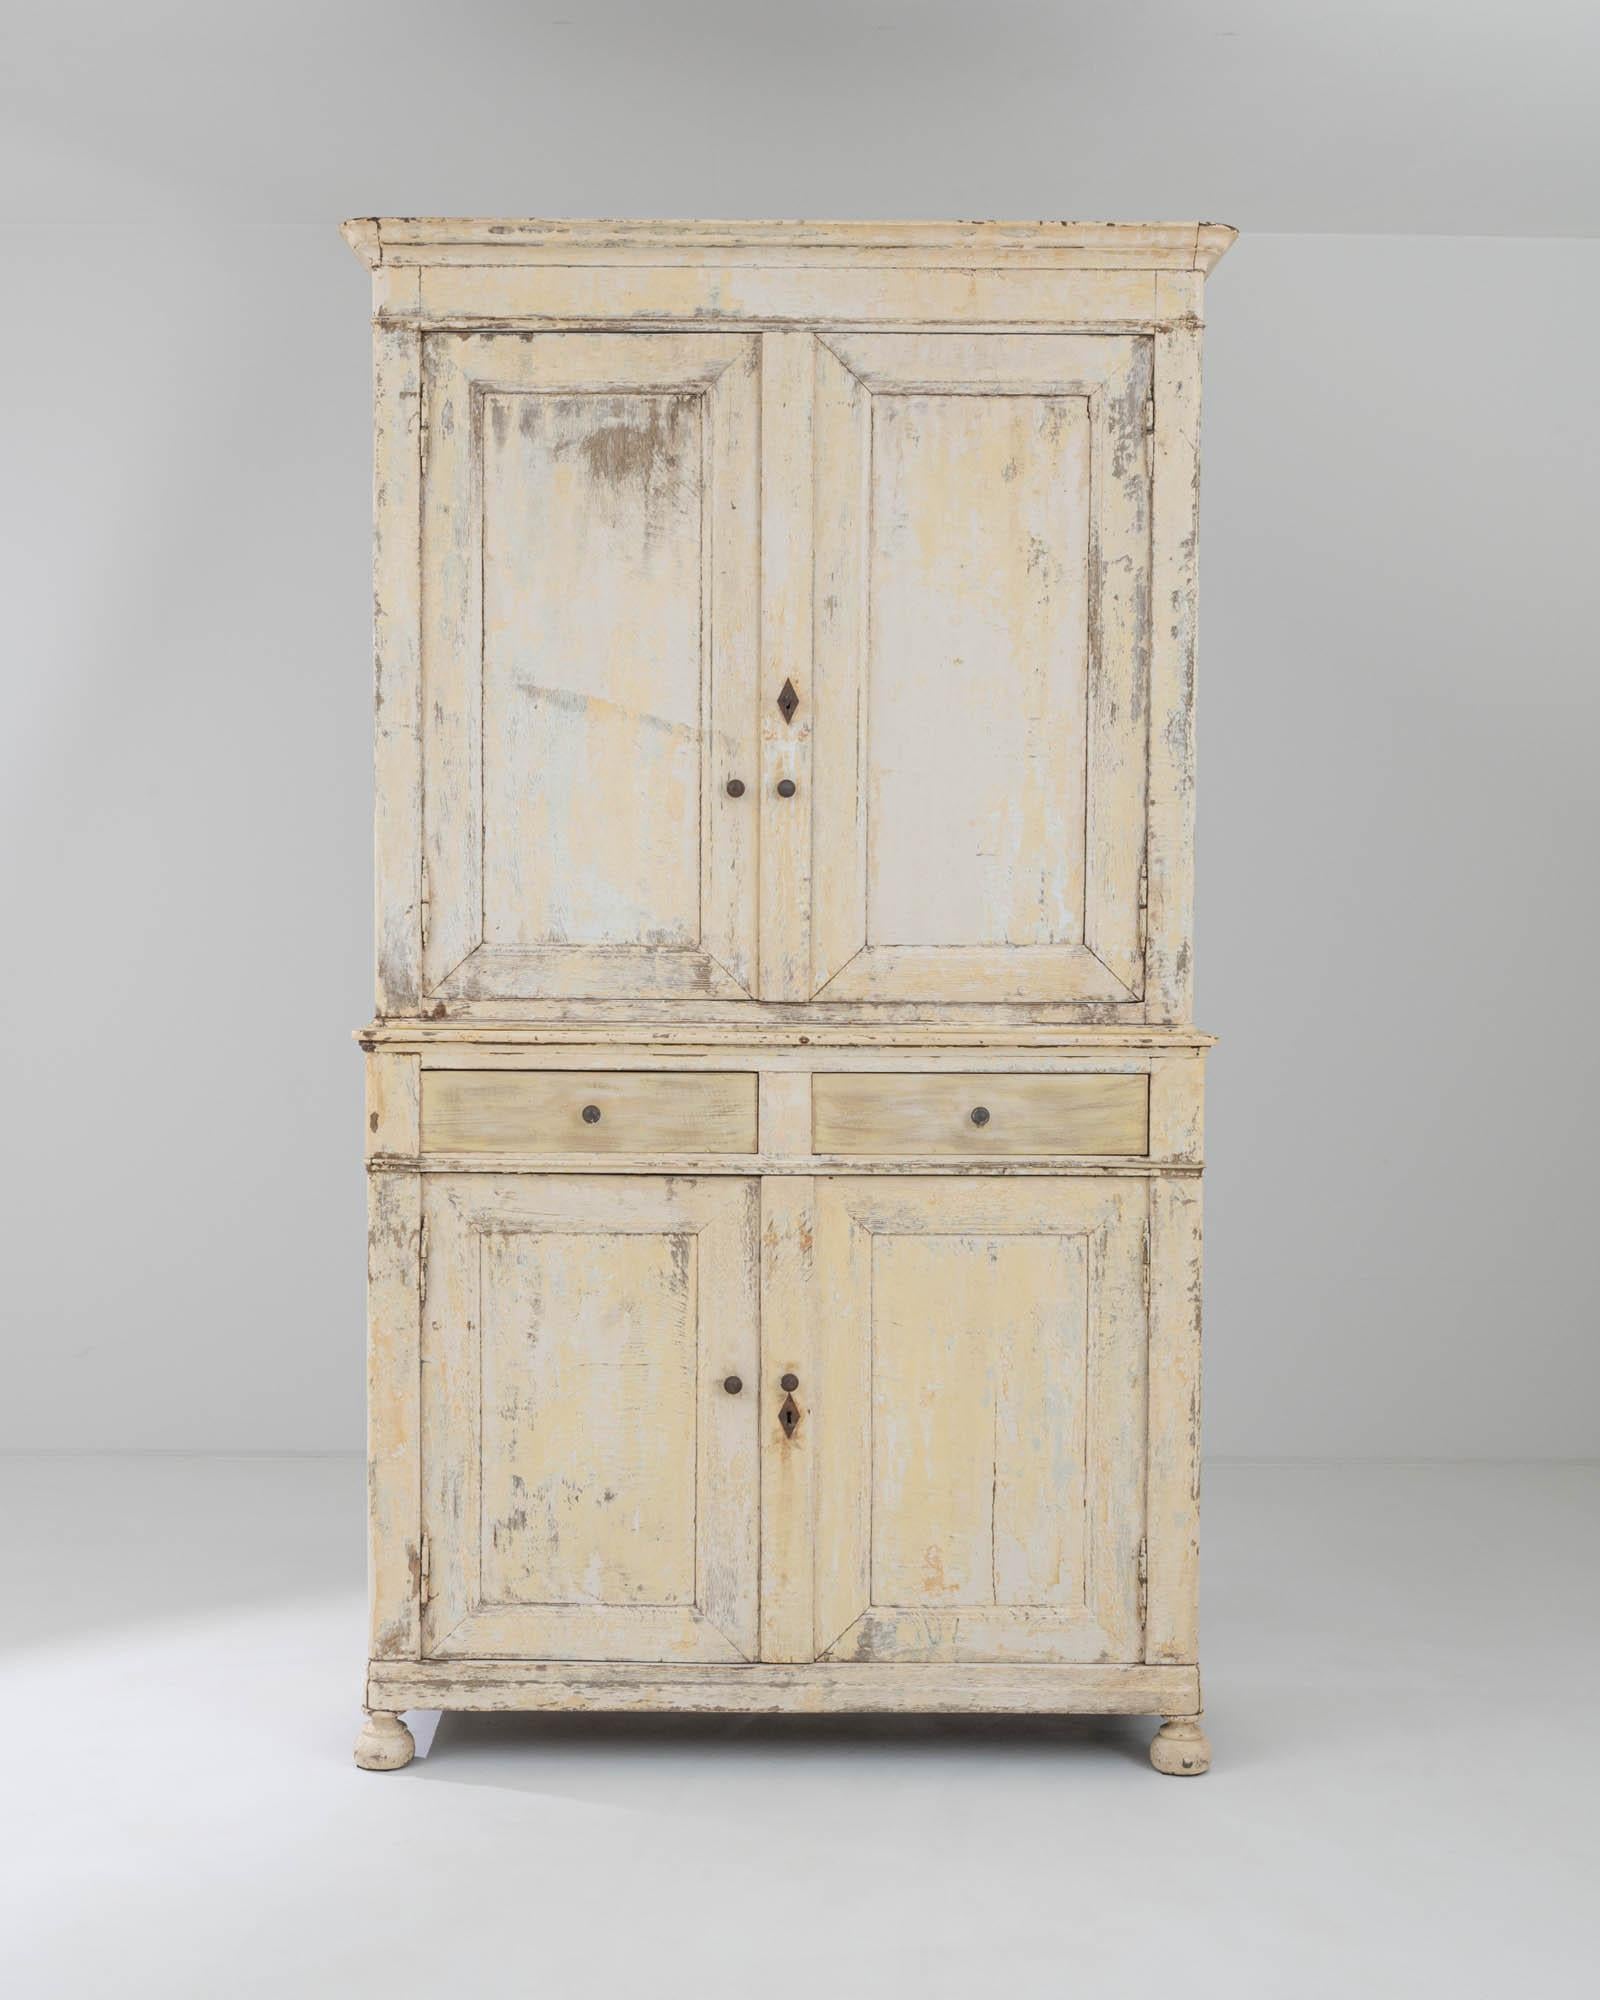 Sturdily resting on its carved bun feet, this antique wooden cabinet was made in 19th-century France. Its deux corps structure is gracefully divided by a set of drawers, creating a distinction between the spacious upper compartment with panel doors